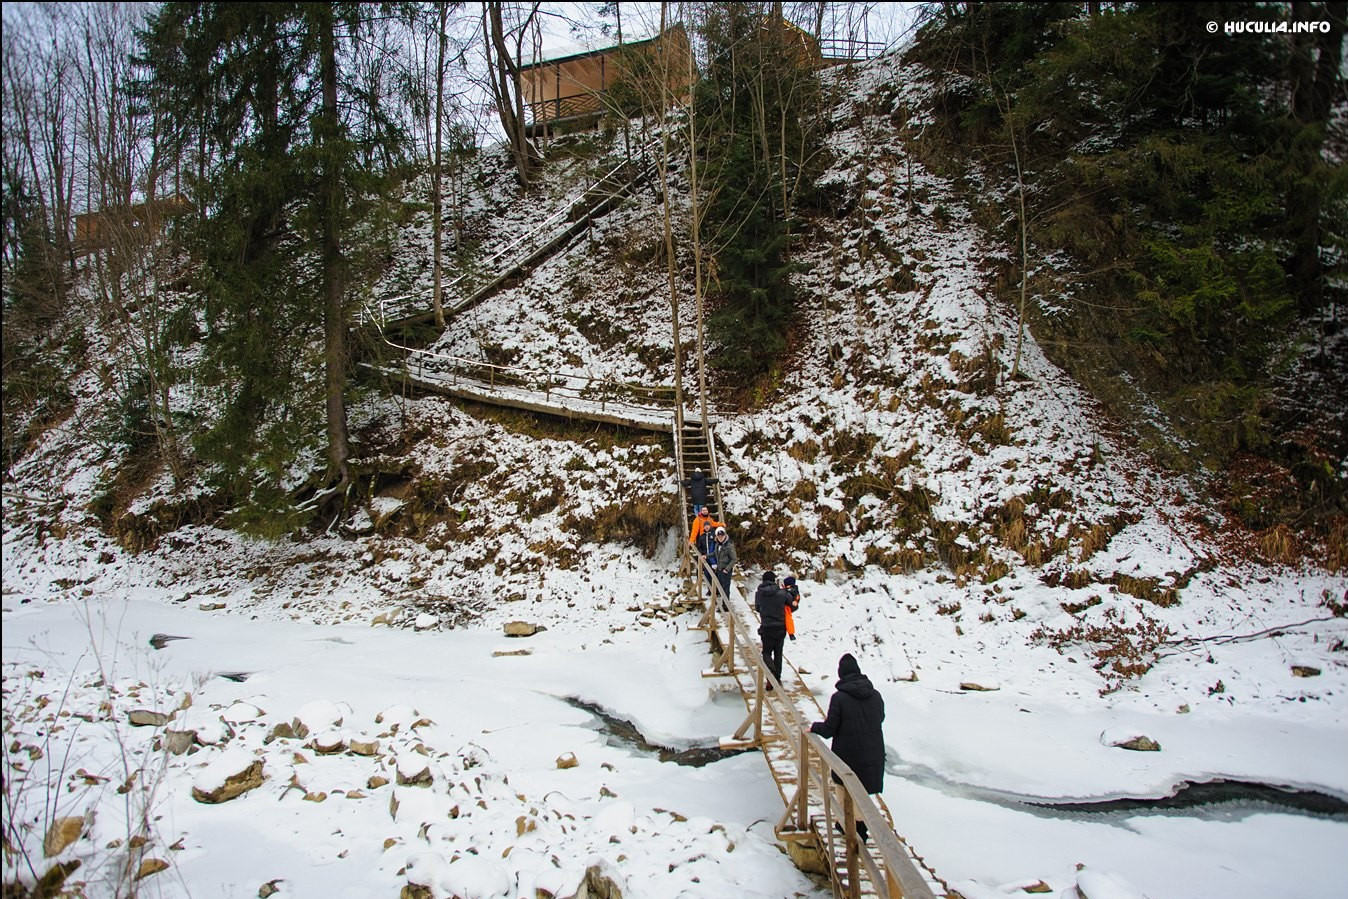 Climb to the cheese factory by a picturesque staircase and a bridge over the river Rybnitsa